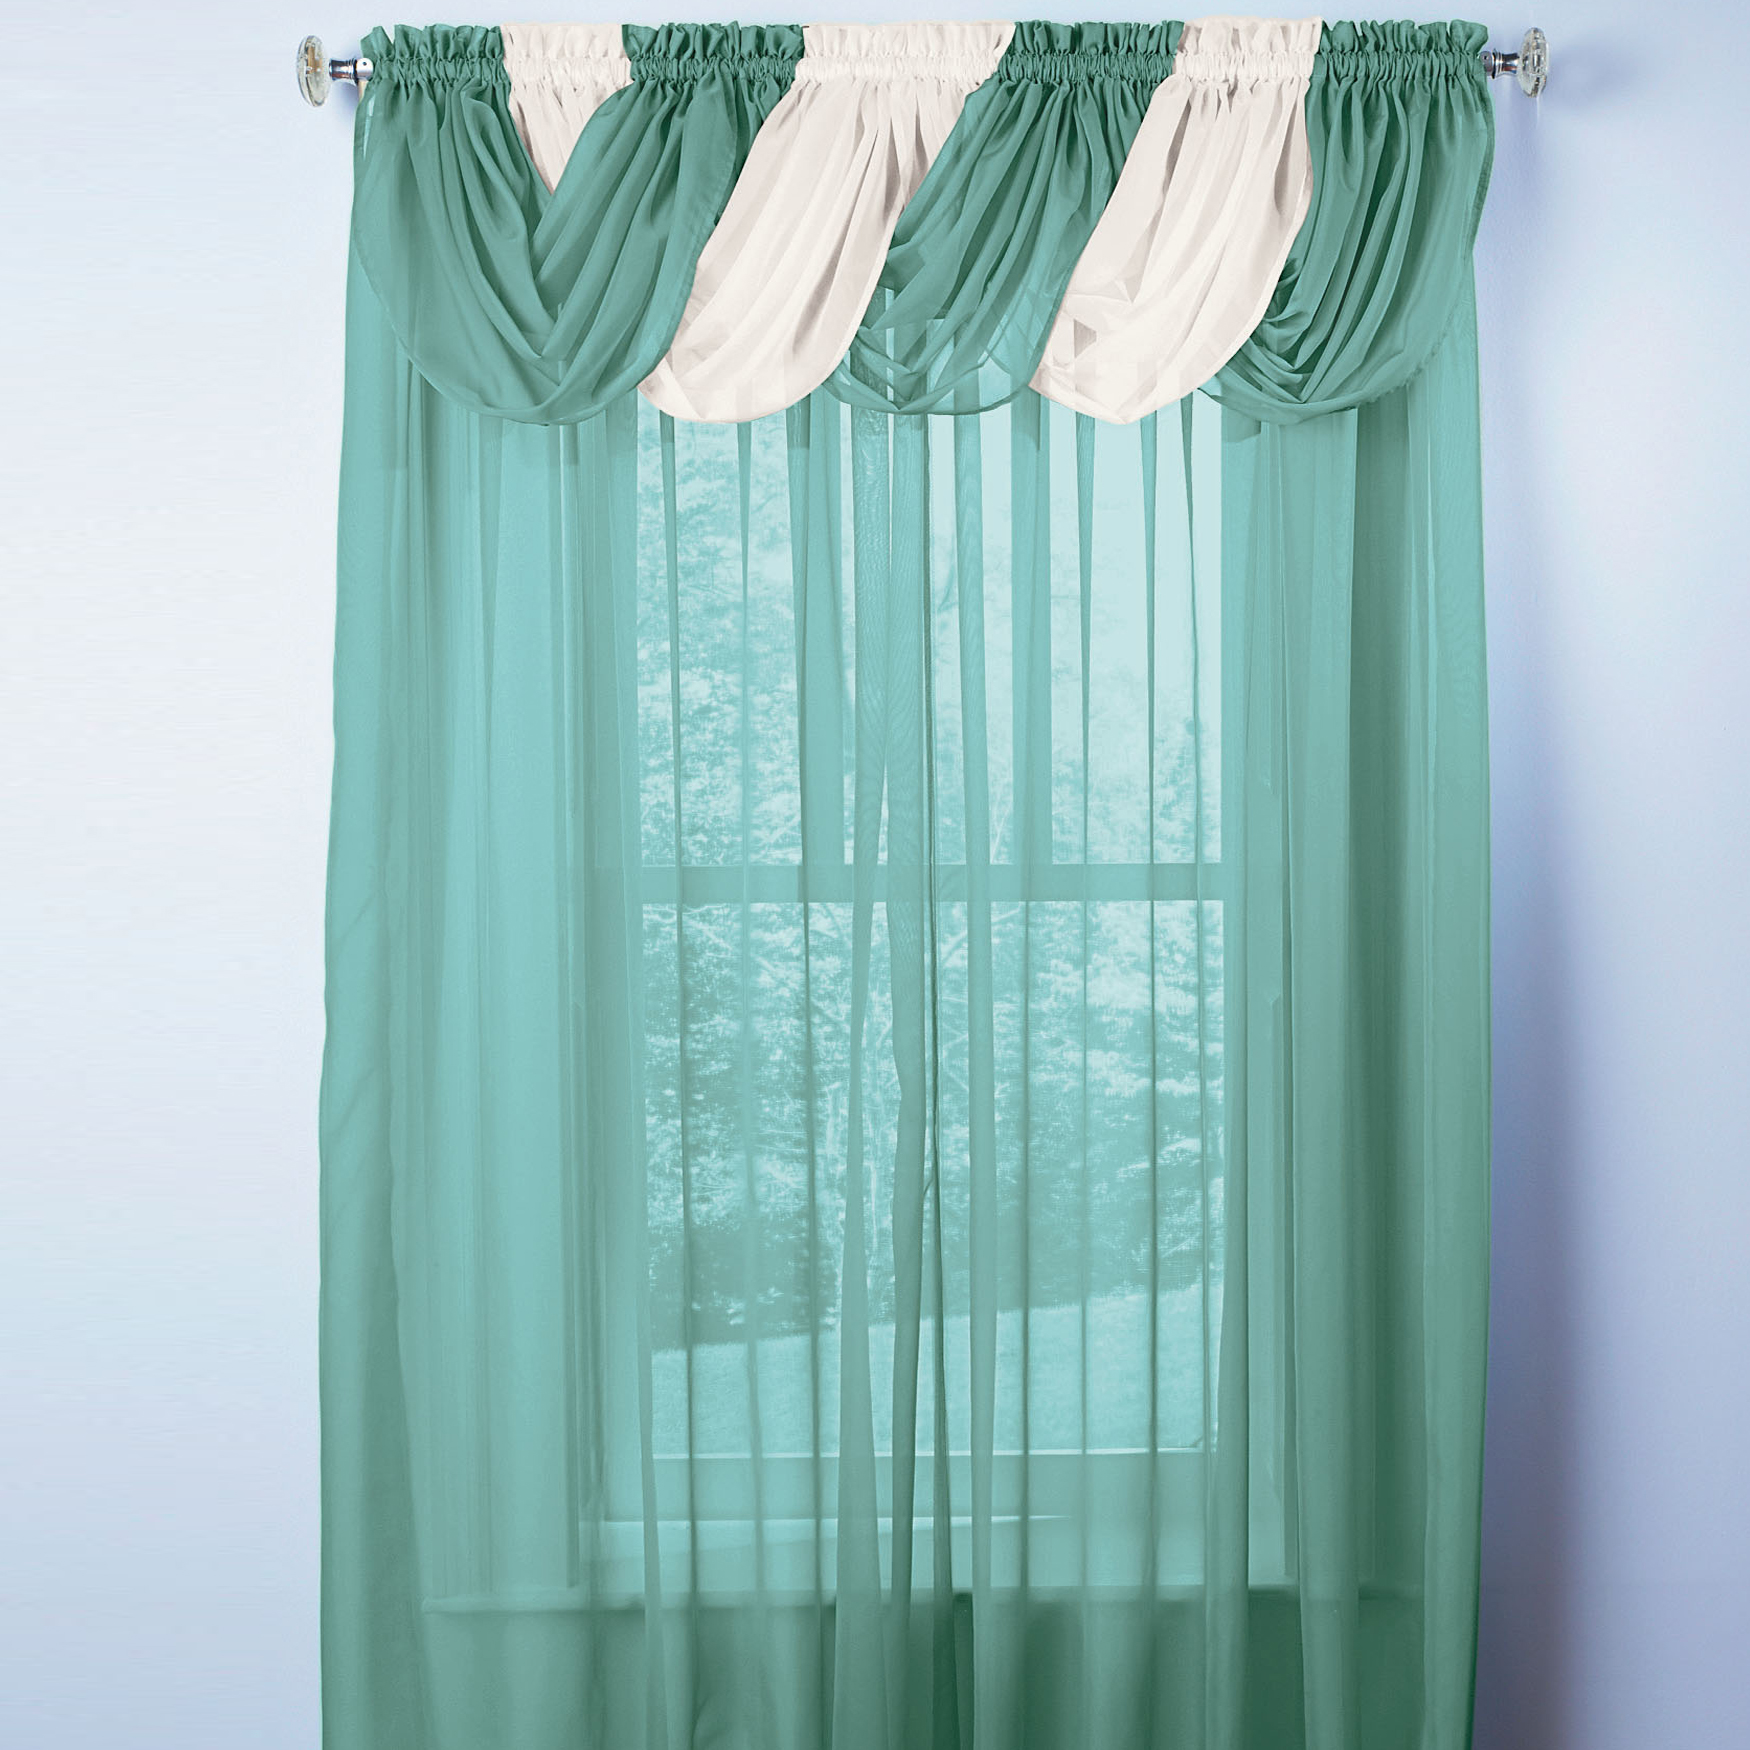 How To Hang Scarf Curtains Scarf Valance Curtains